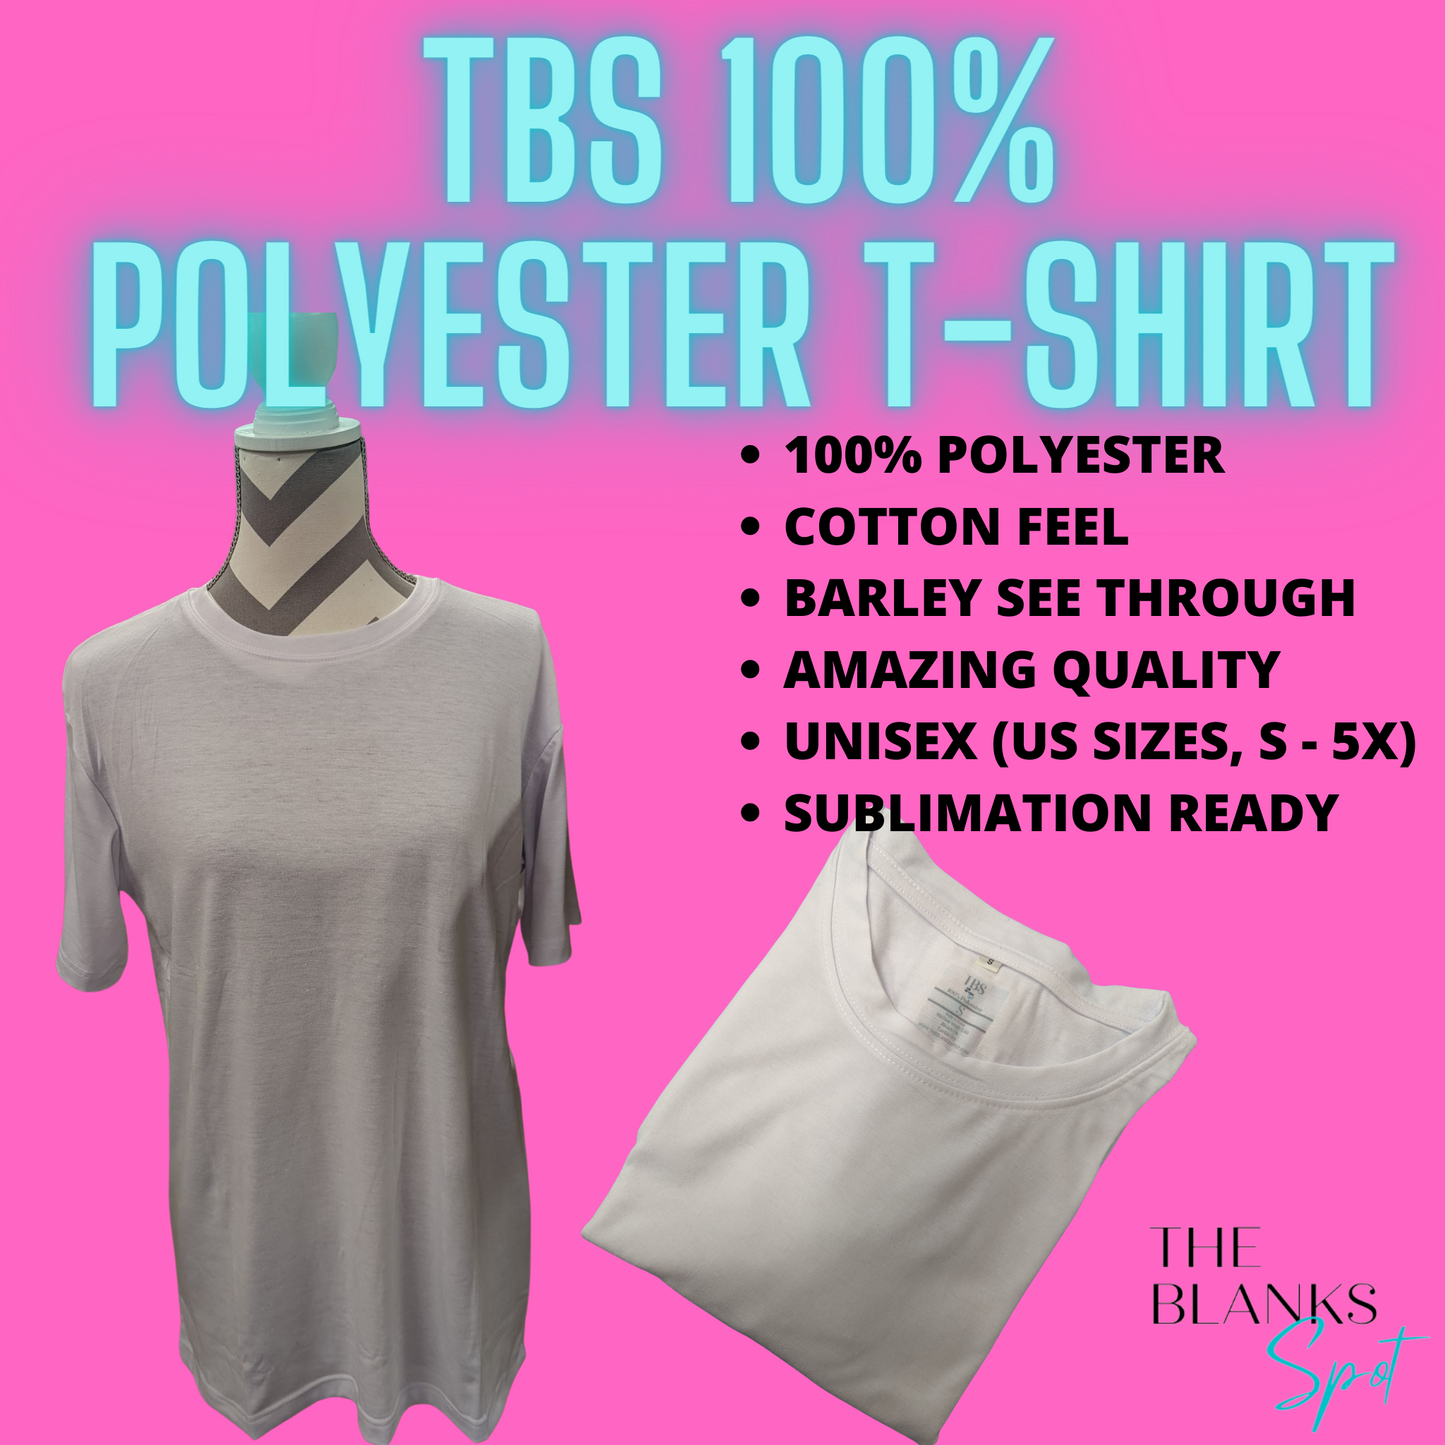 T-Shirt - TBS 100% Polyester (COTTON FEEL)  Sublimation Ready